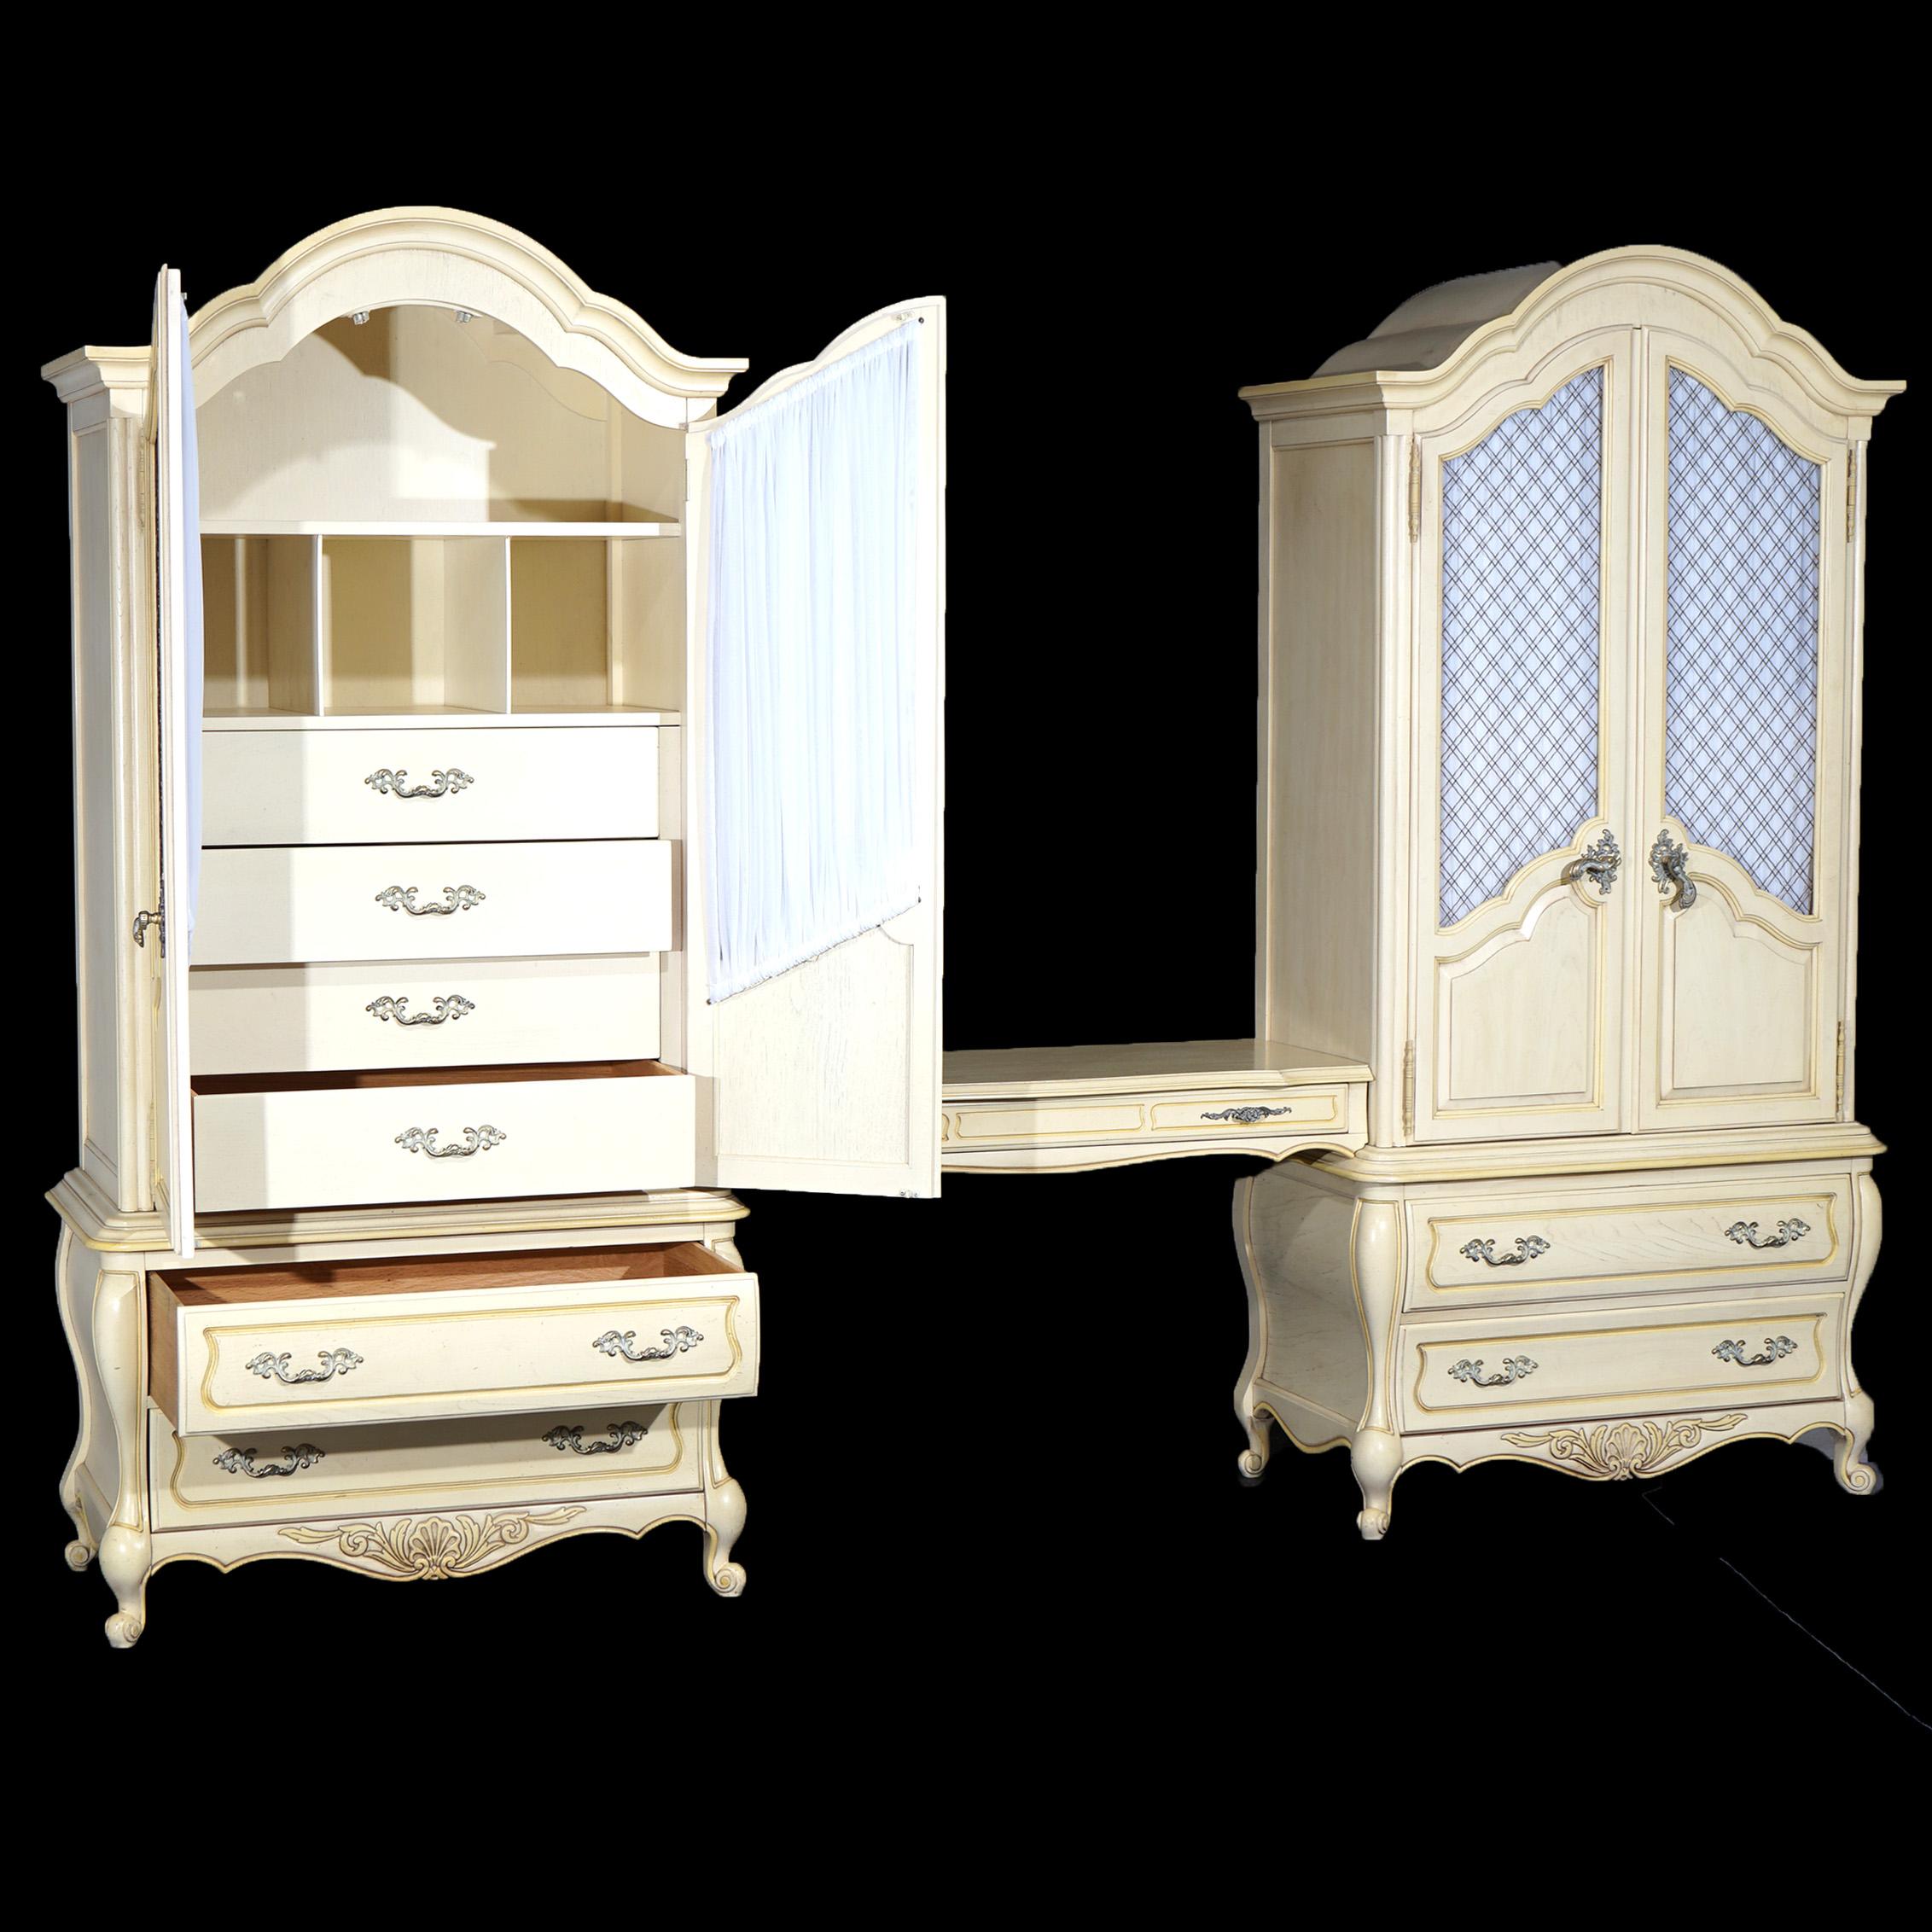 ***Ask About Reduced In-House Shipping Rates - Reliable Service & Fully Insured***
A pair of French Provincial wardrobes by Hickory offers painted wood construction with double doors having curtains and metal lattice facing and opening to interior